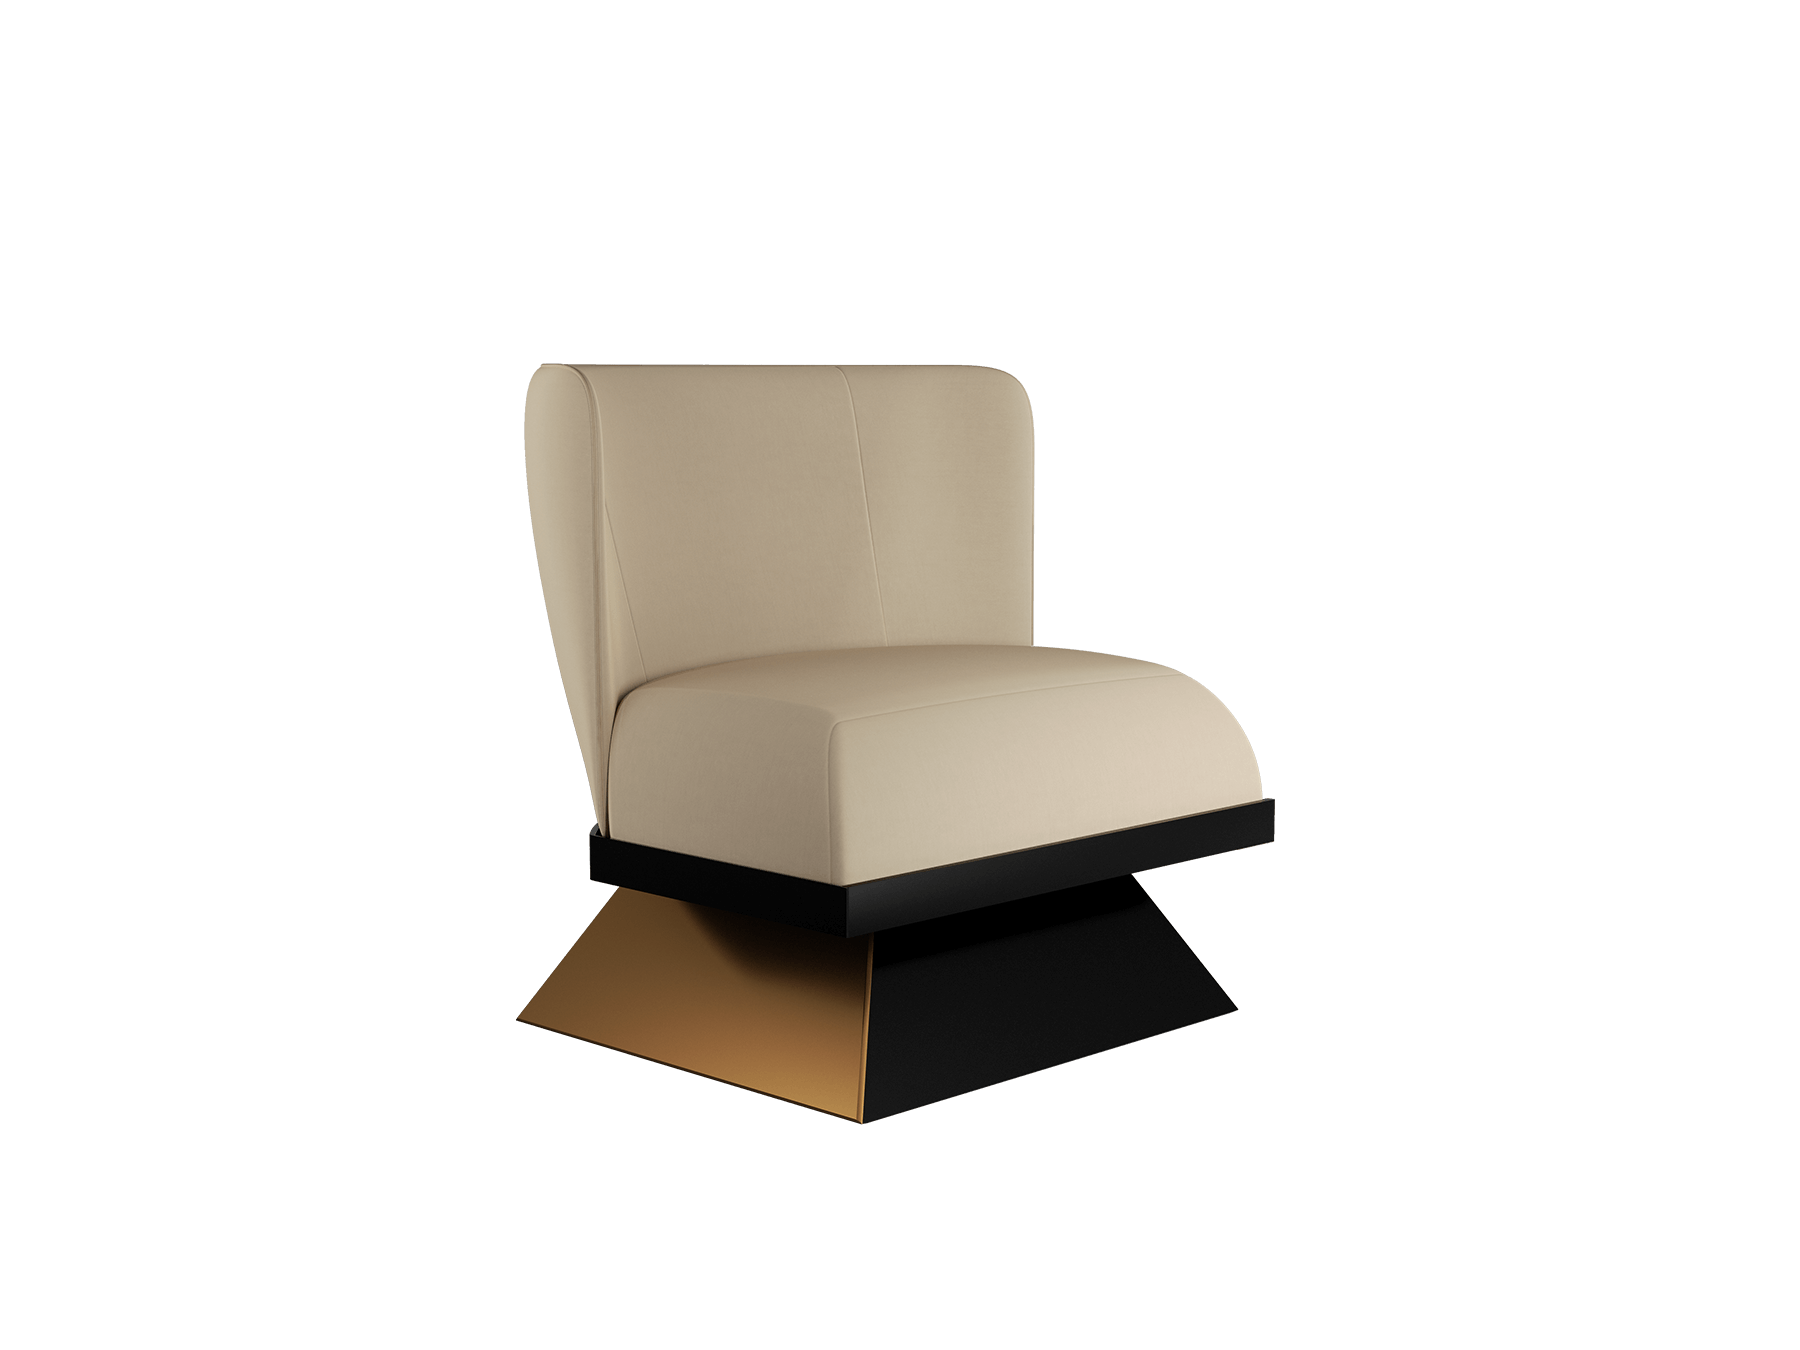 modern chair for any contemporary interior design project